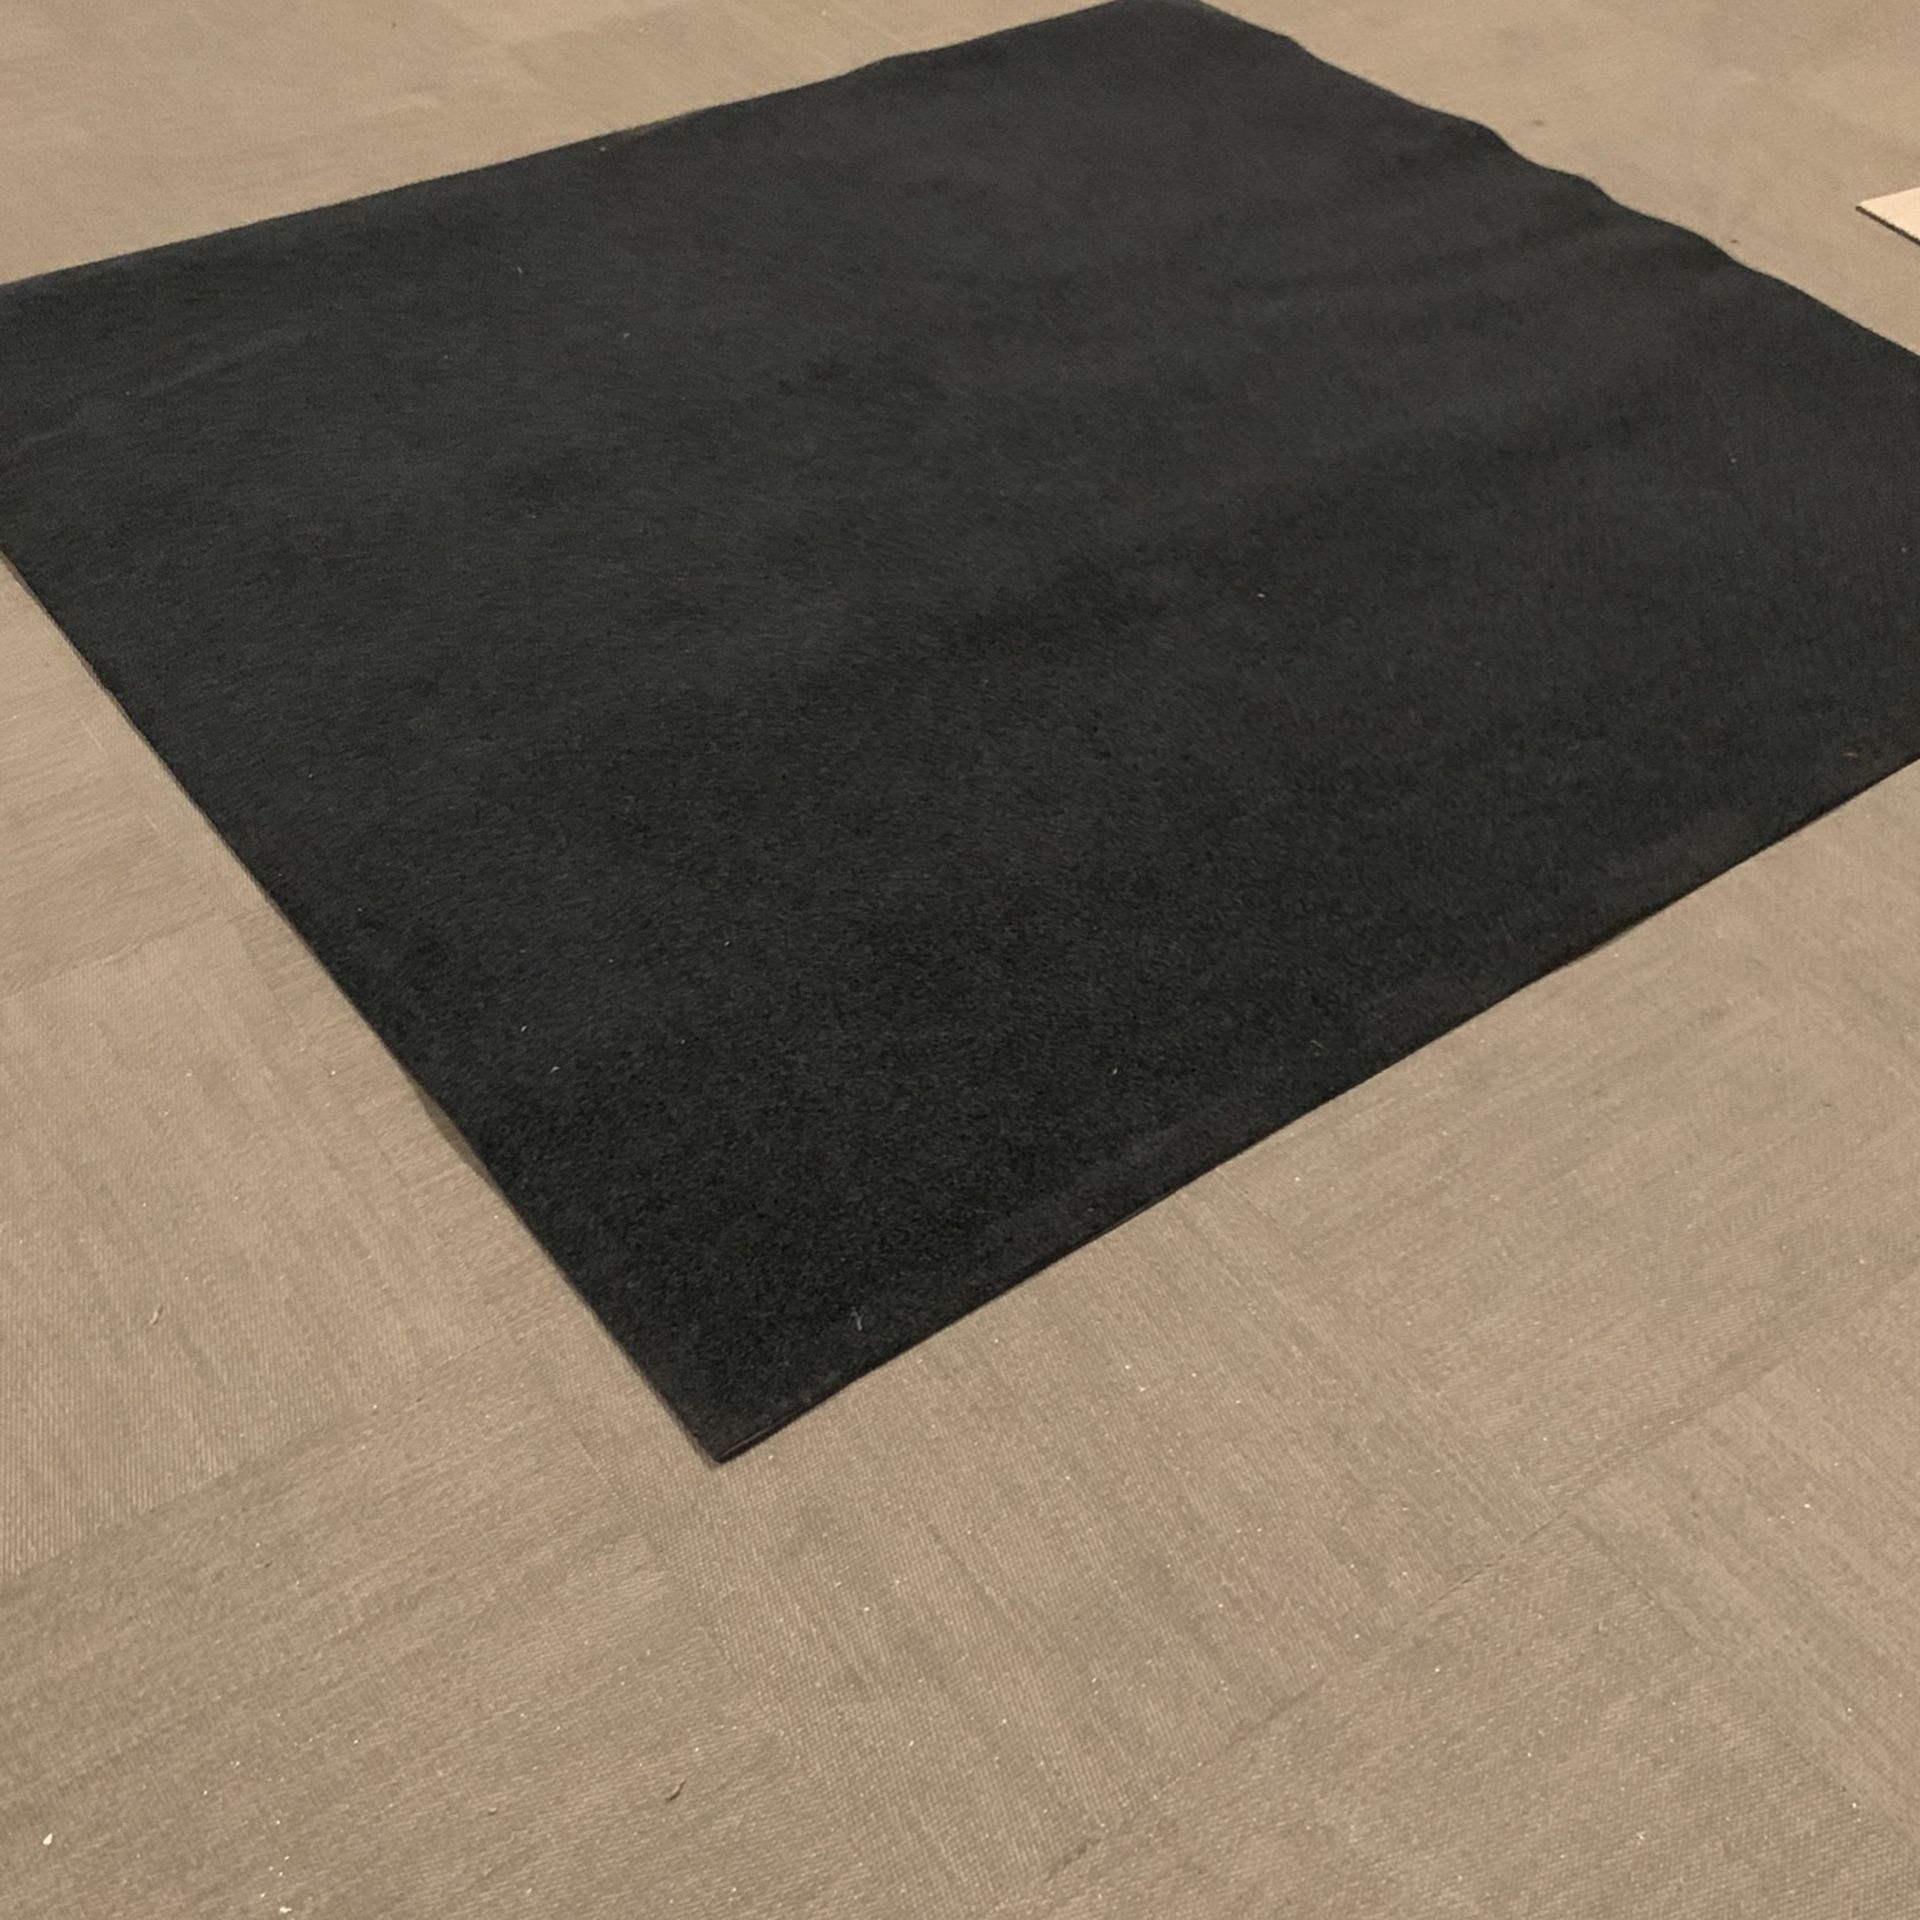 New 70”x77” Mat With Rubber Backing 